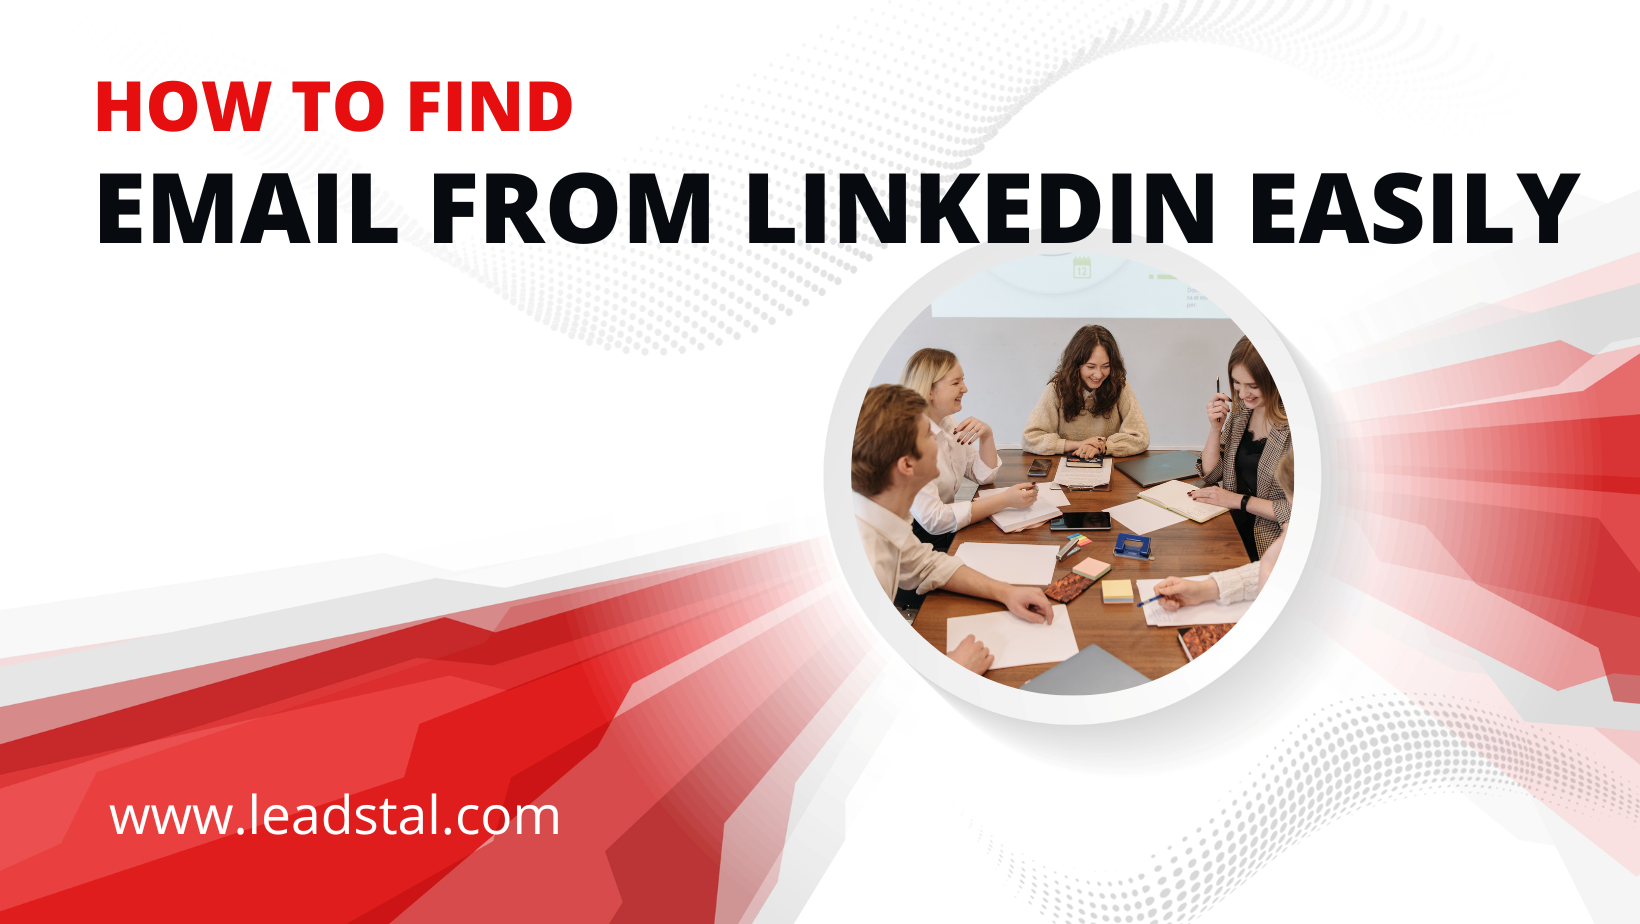 How to find email from LinkedIn easily